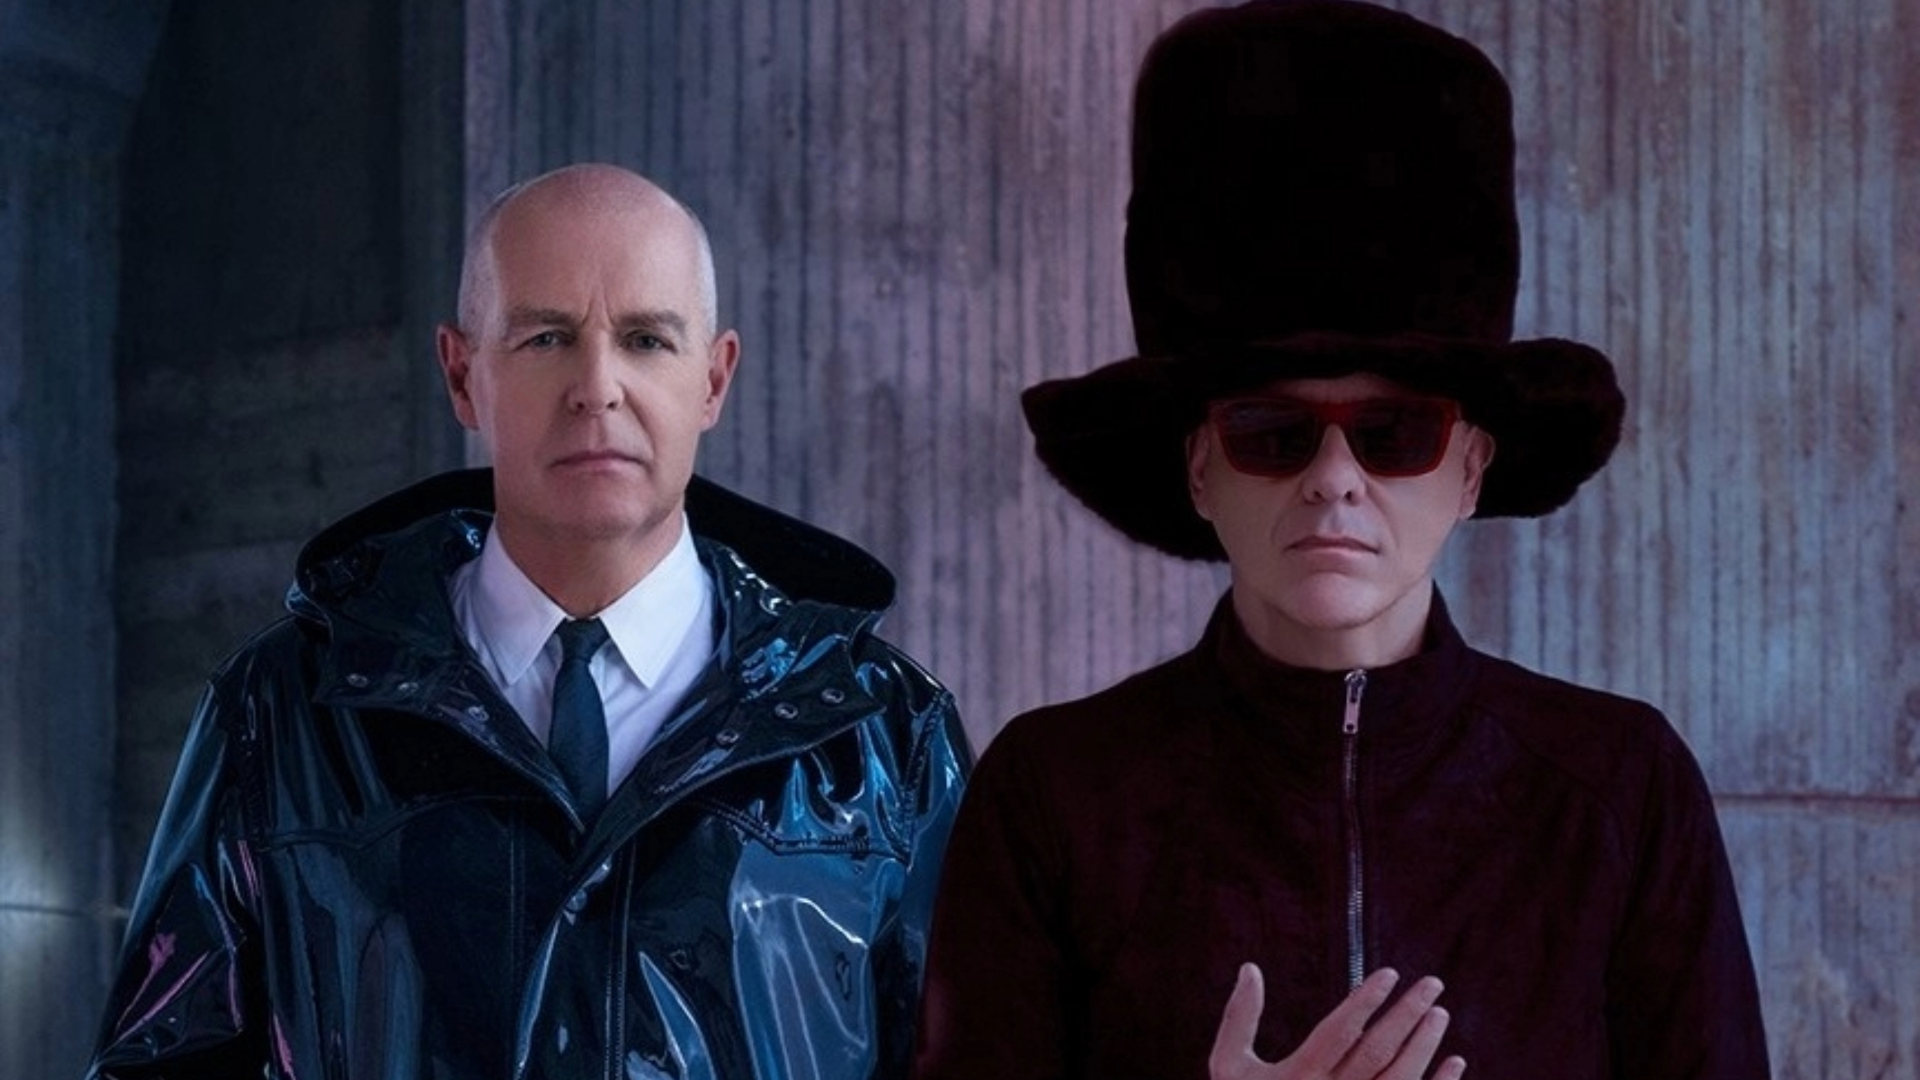 Heart - song and lyrics by Pet Shop Boys